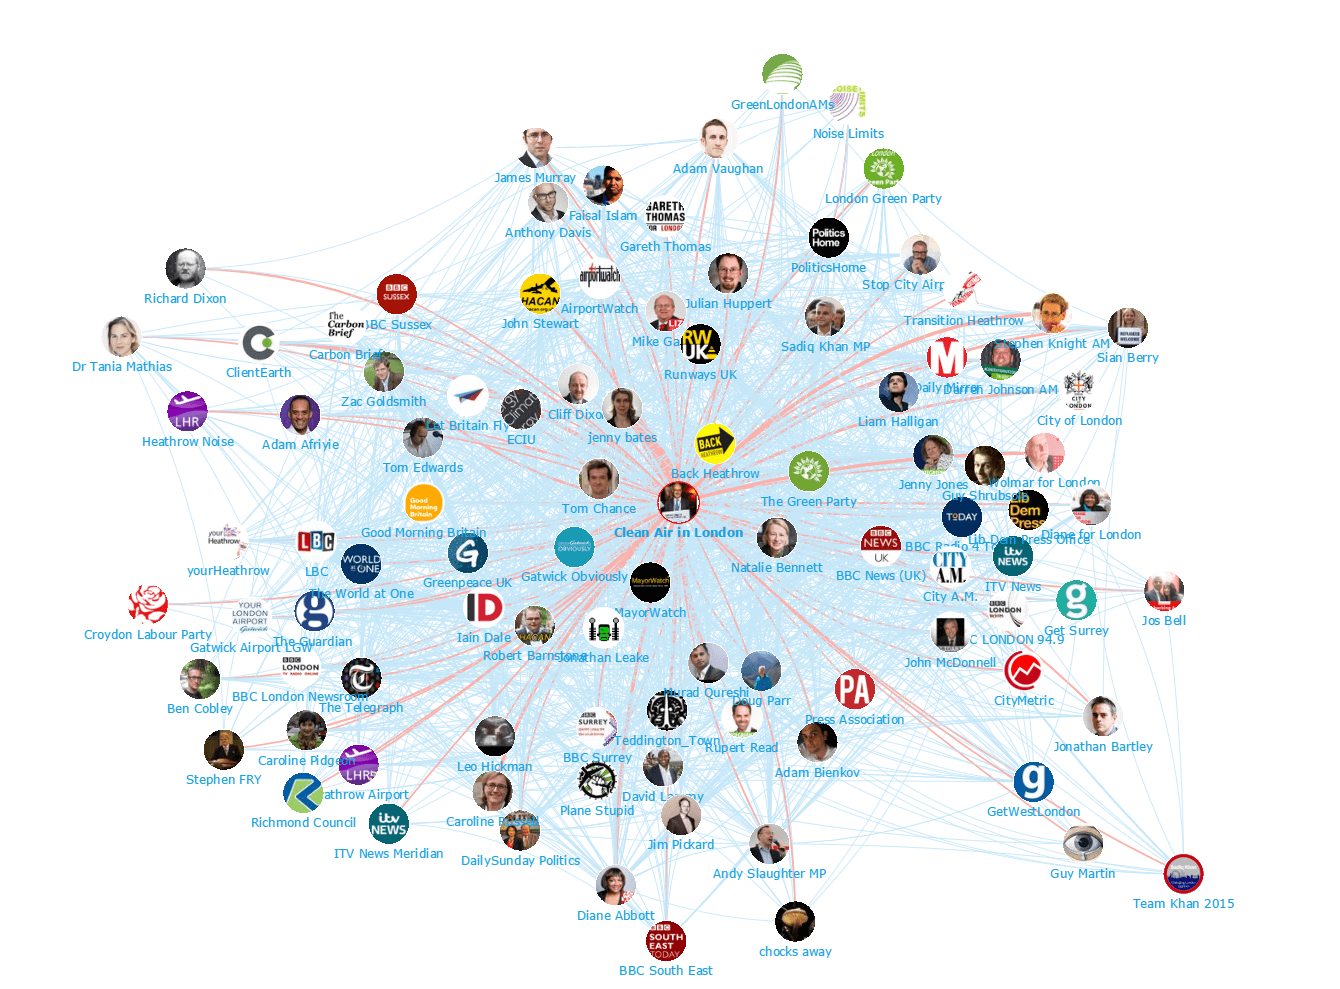 Gatwick vs. Heathrow Top 100 Influencers and Brands Network Map 2